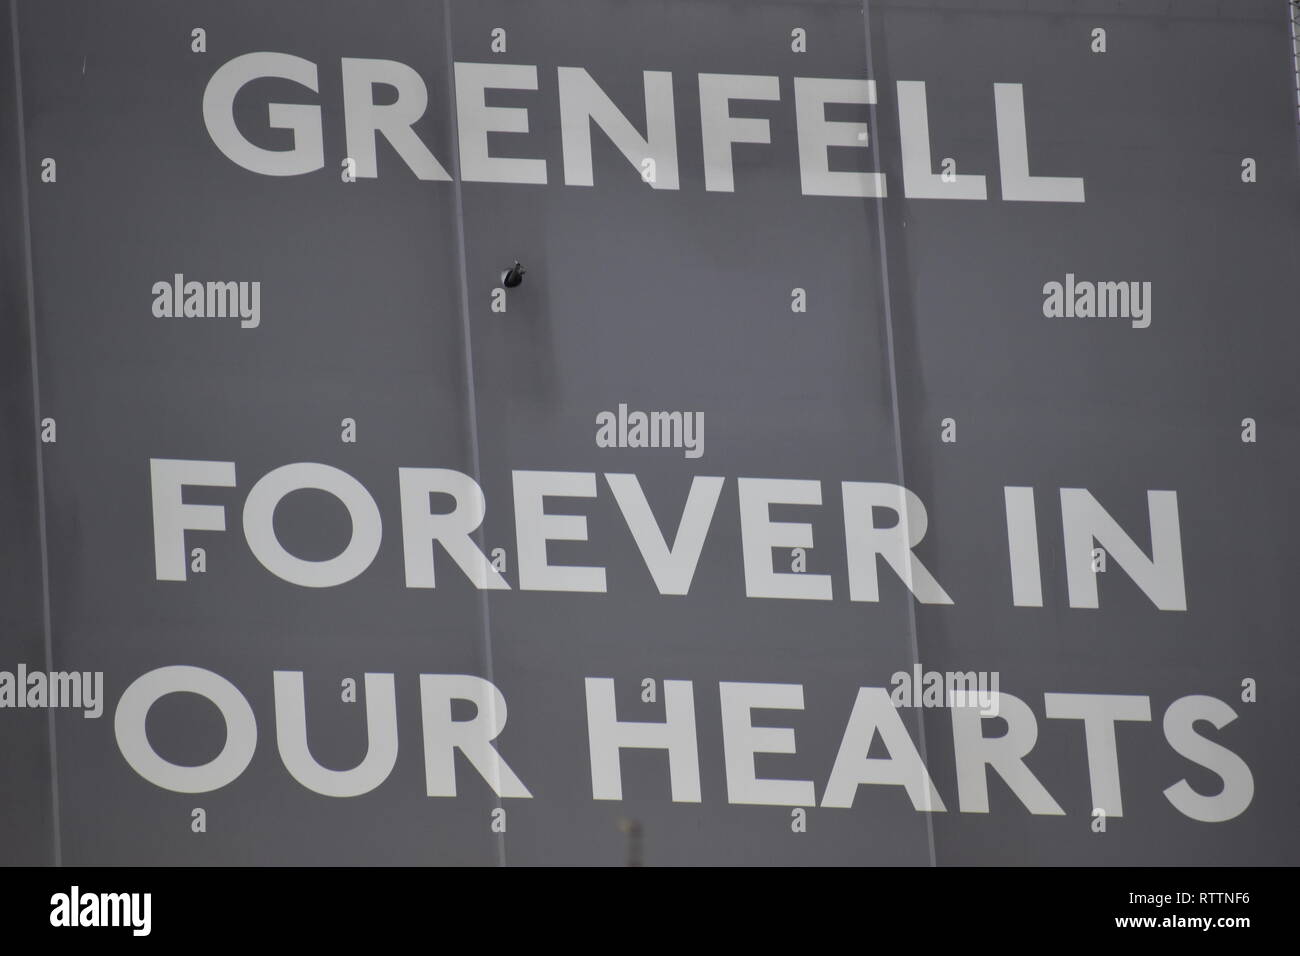 Grenfell Forever in Our Hearts. The Grenfell Inquiry continues this year; renovation and repair is ongoing in the fire damaged tower block of flats. Stock Photo